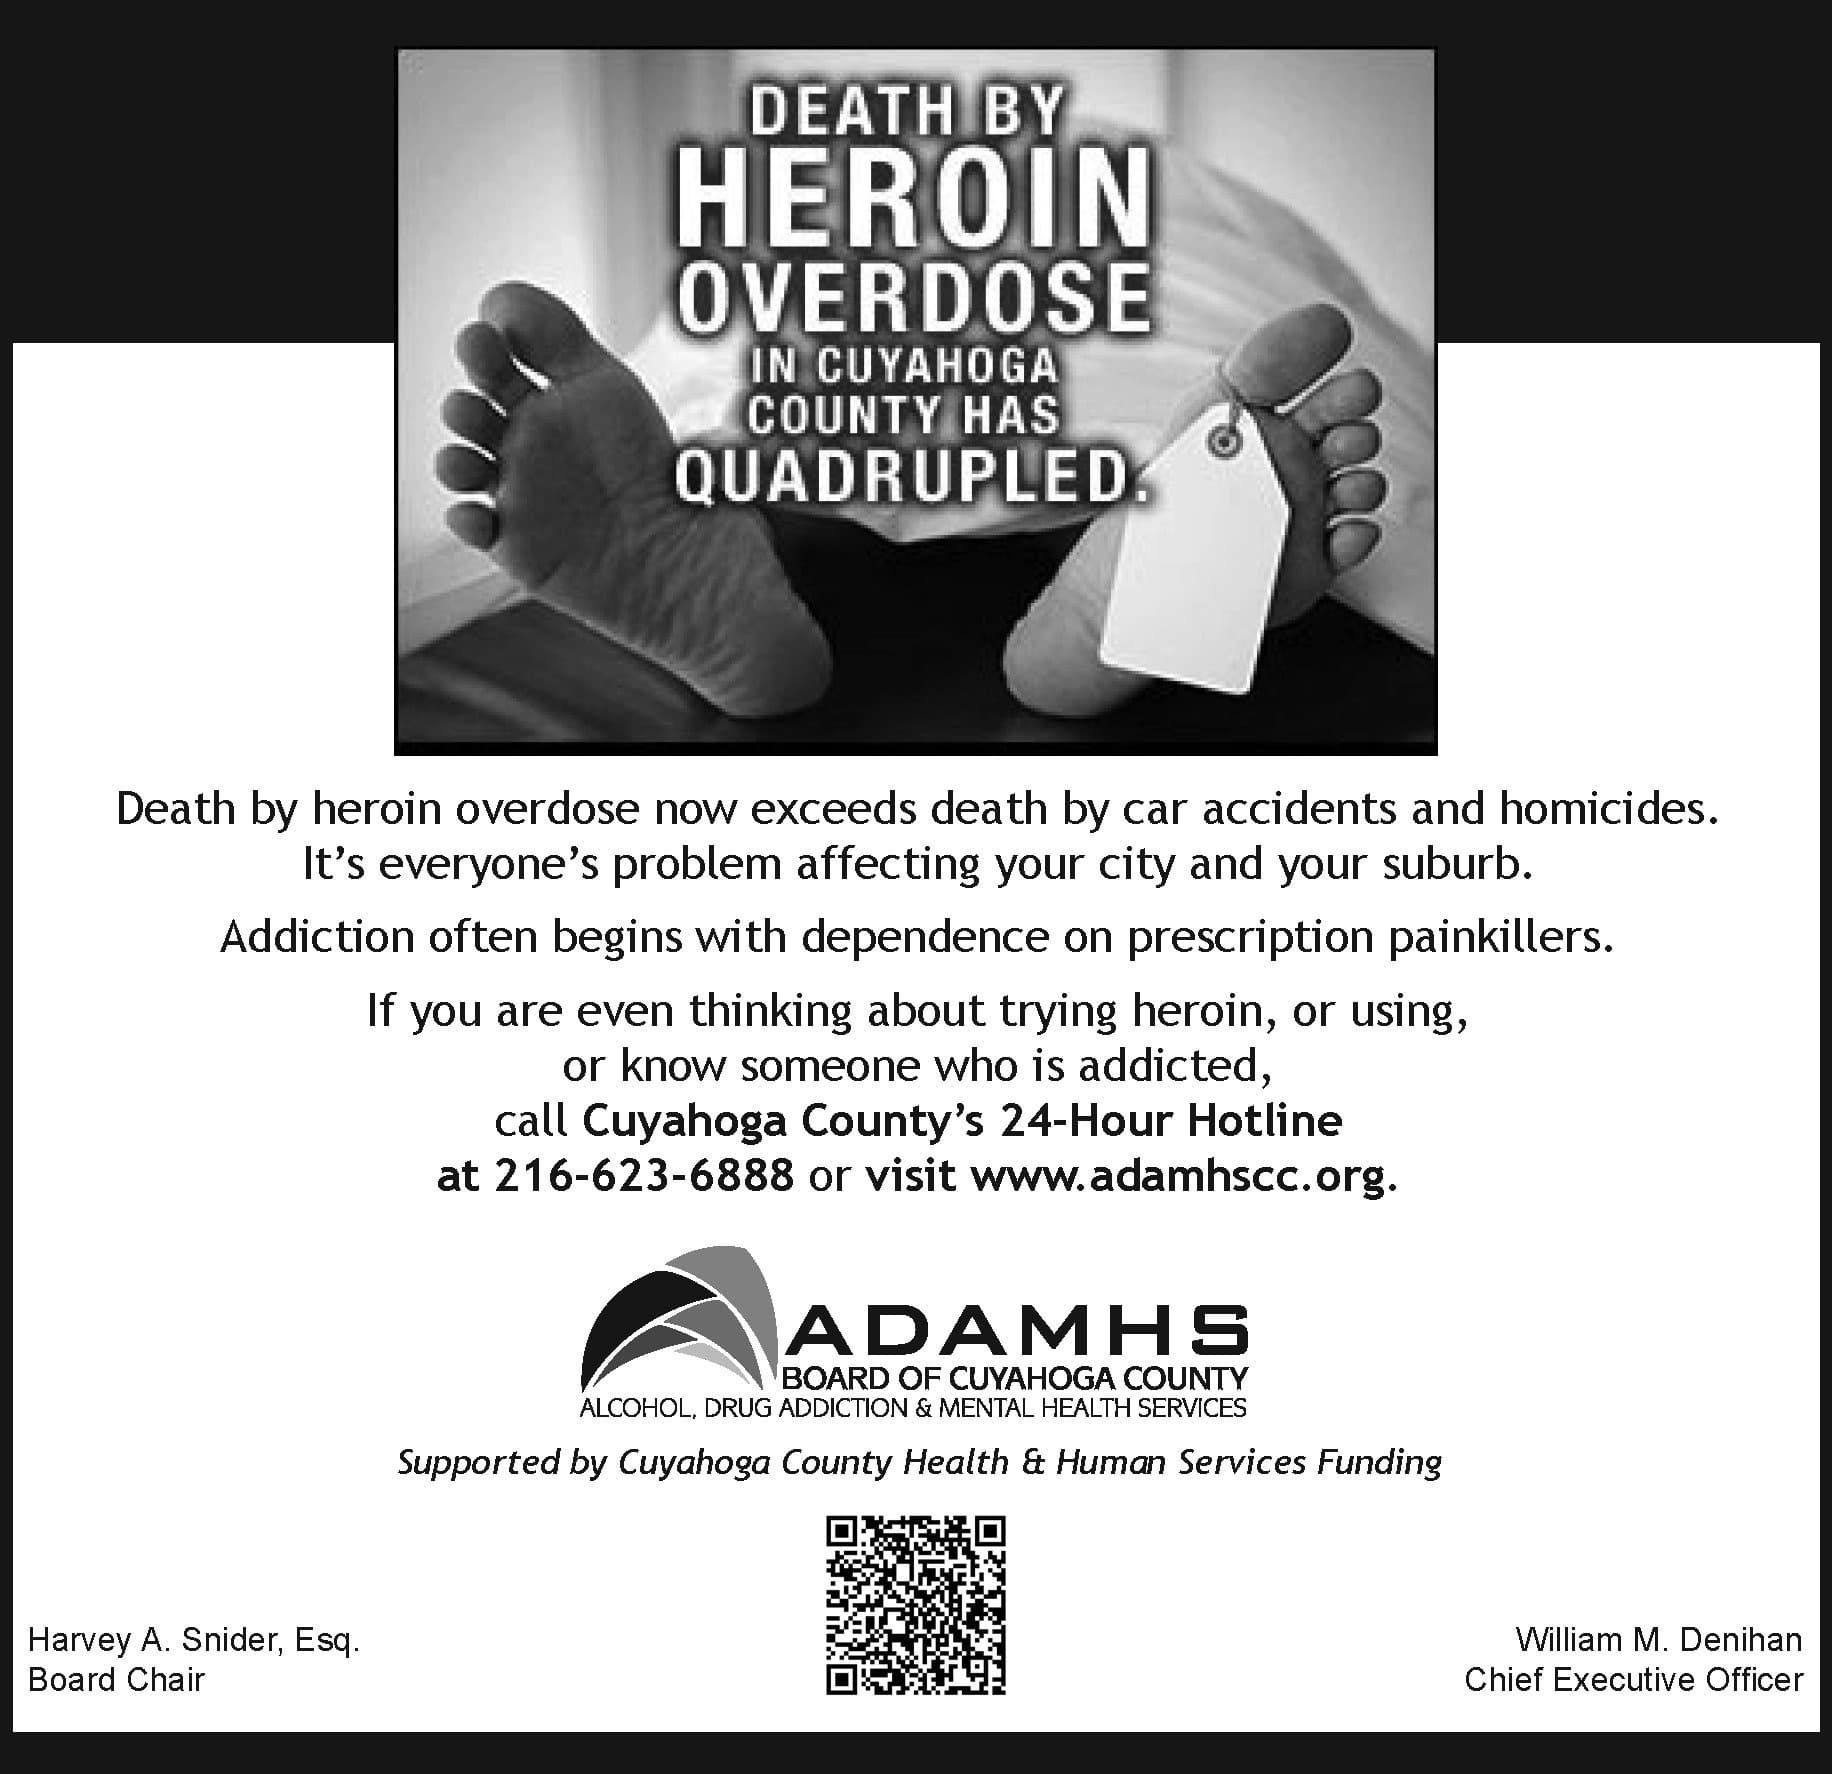 Campaigns seek to raise awareness about heroin addiction and overdose ...